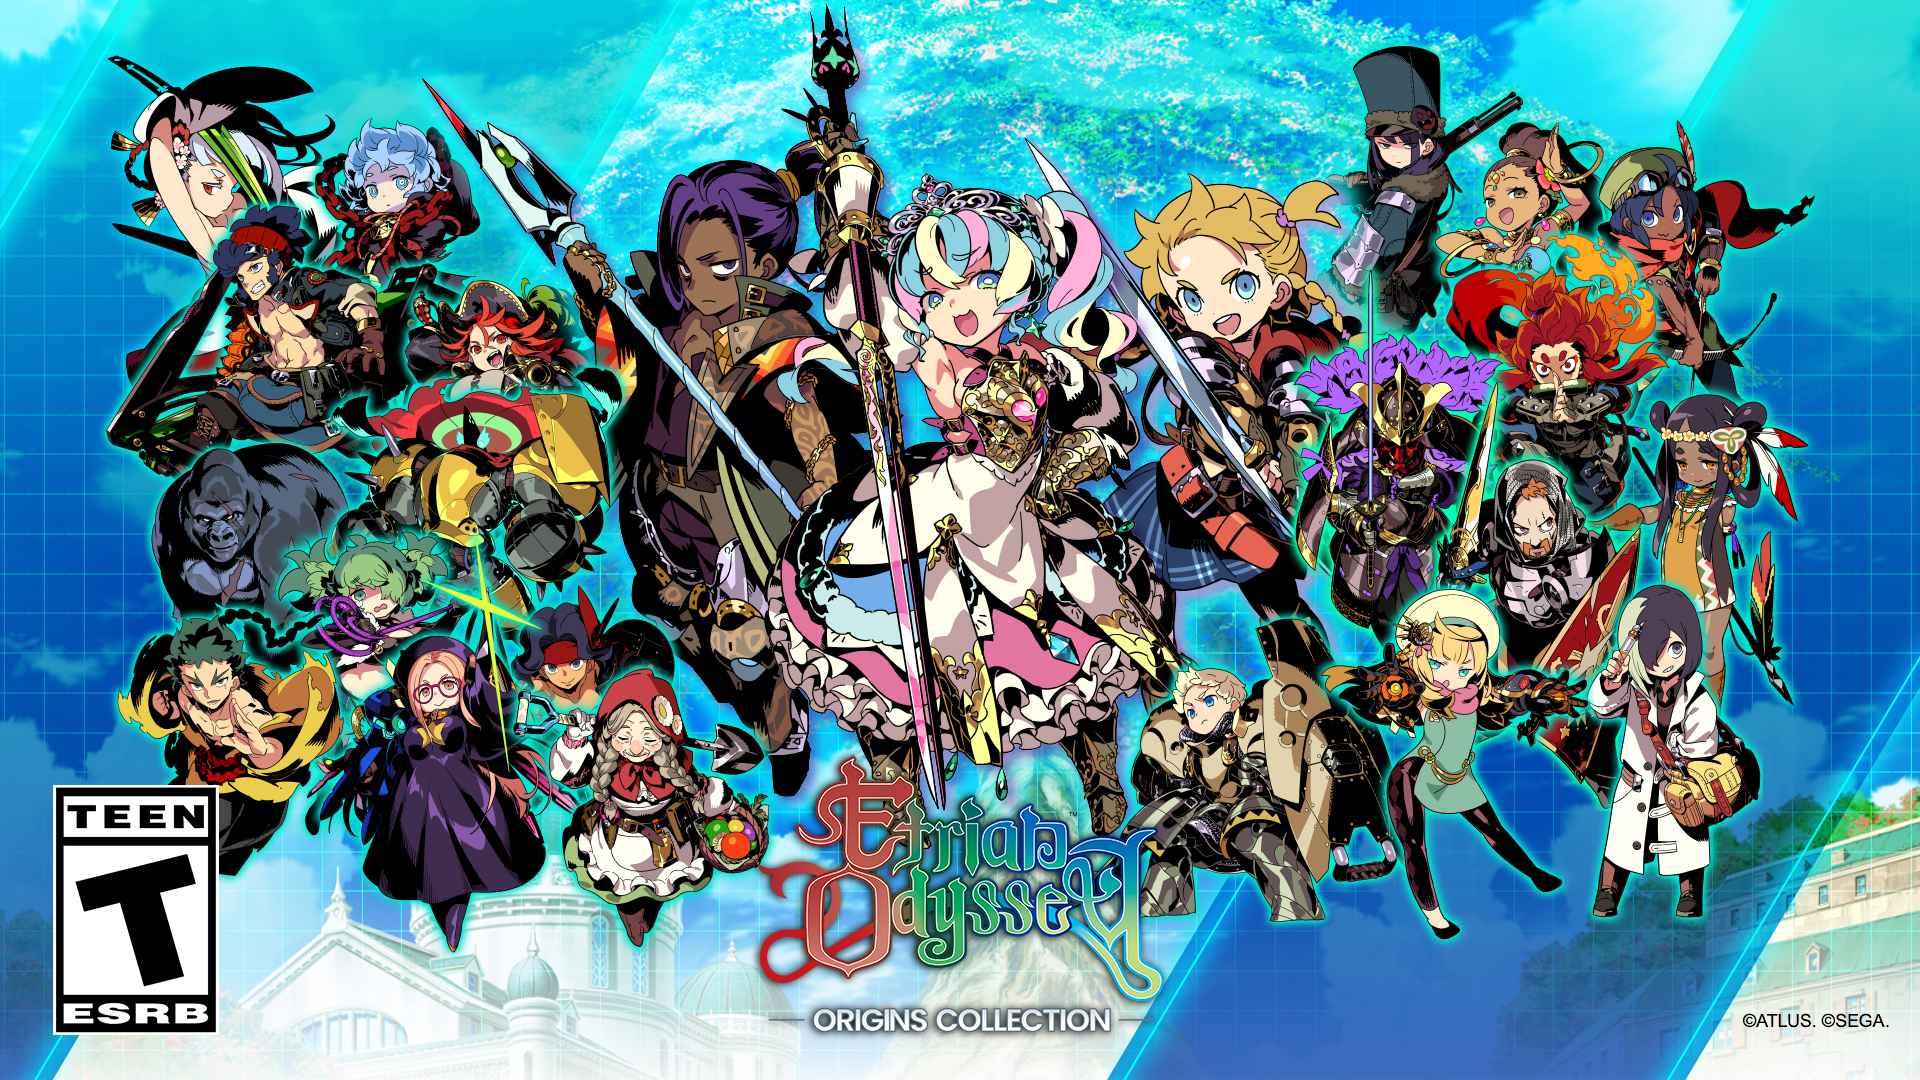 Official ATLUS West Your Adventuring Guild With Brand New Character Portraits For 24 Fan Favorite Classes In Etrian Odyssey Origins Collection! Stay Tuned For Class Showcases Coming Every Week!